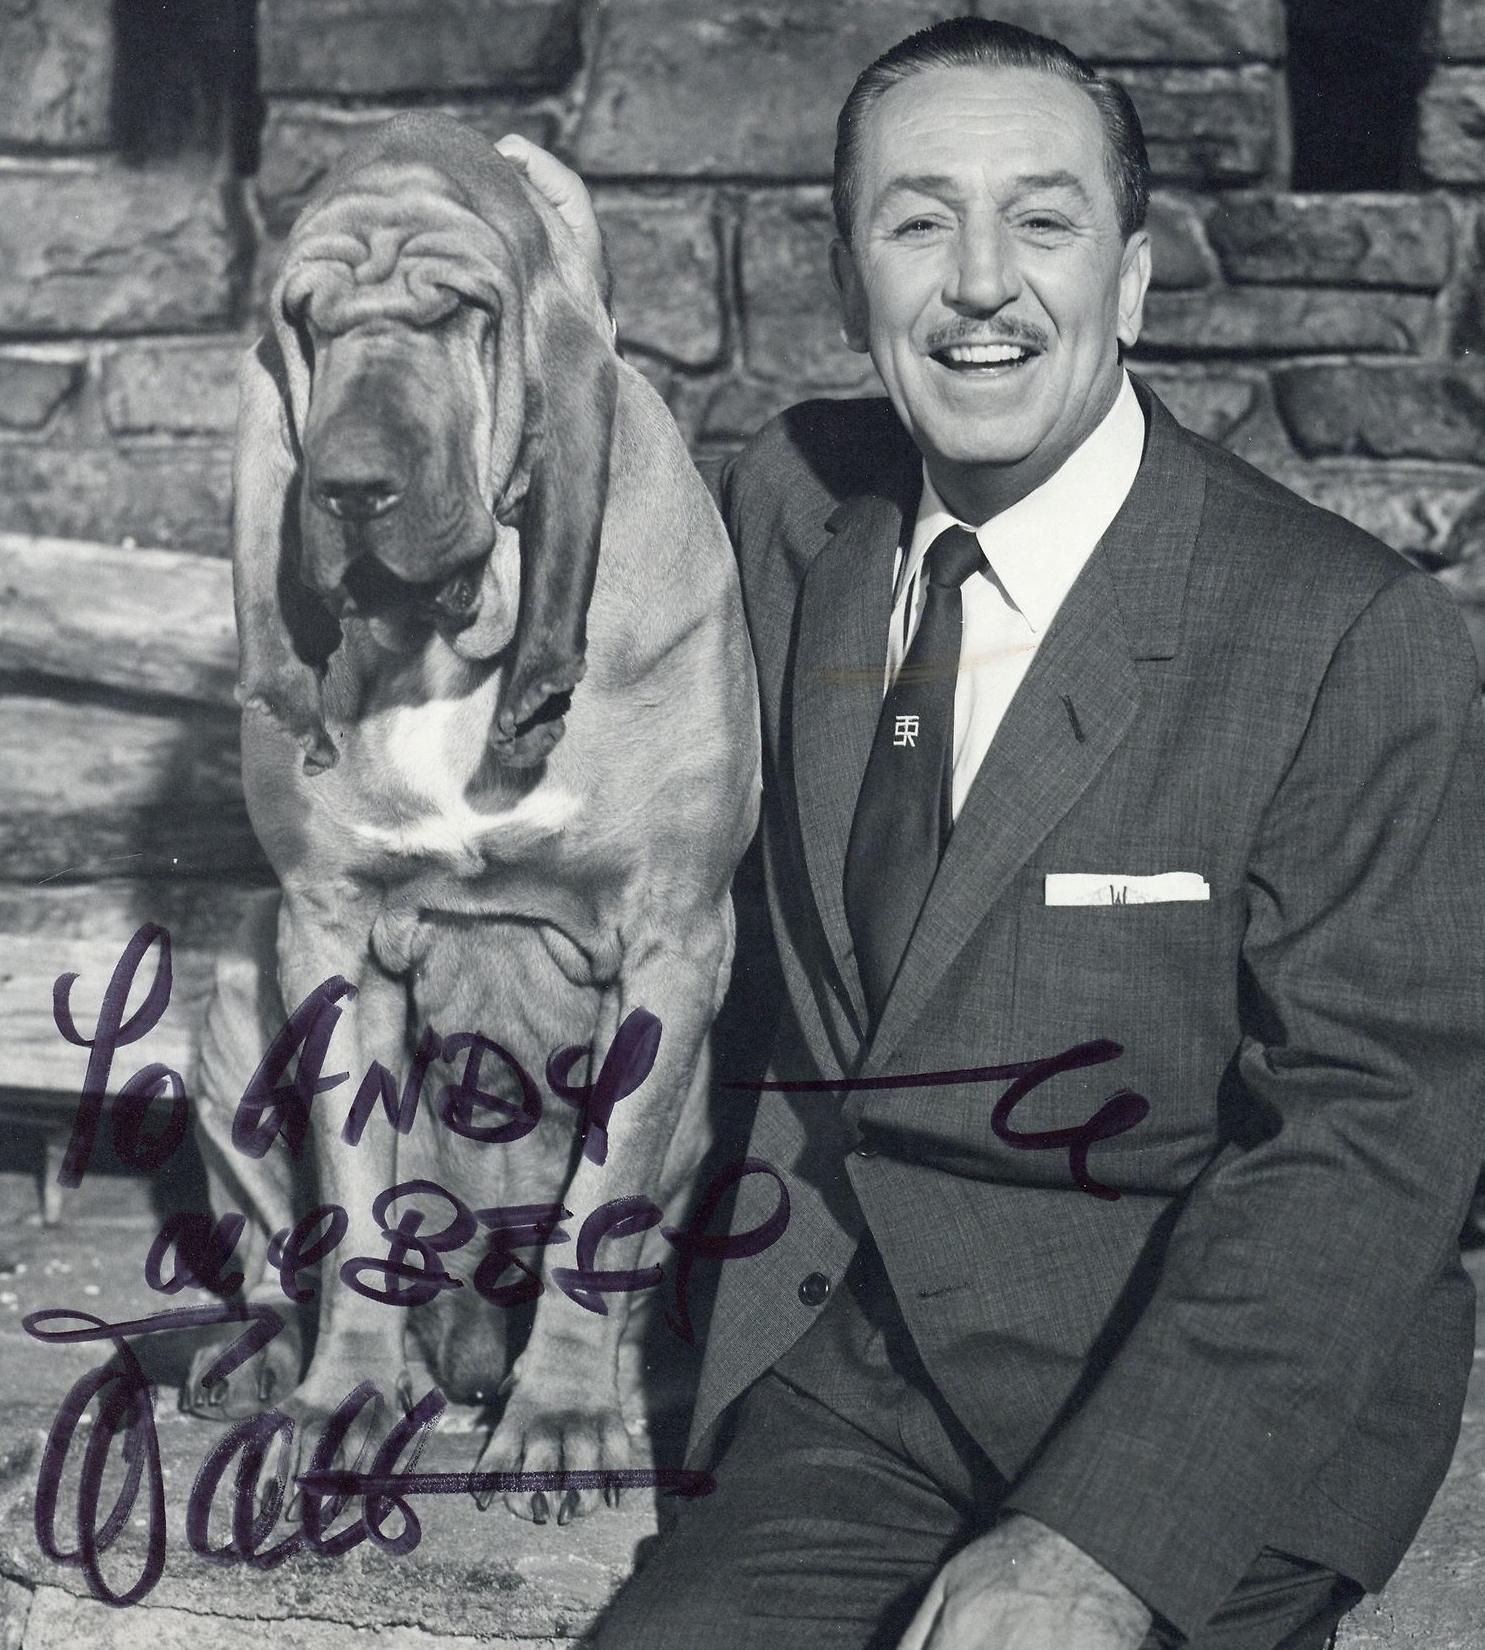 - A beautiful black and white photograph signed by one of the 20th century's most important cultural icons

This vintage black and white photograph features Walt Disney seated next to a large dog, and is signed and inscribed 